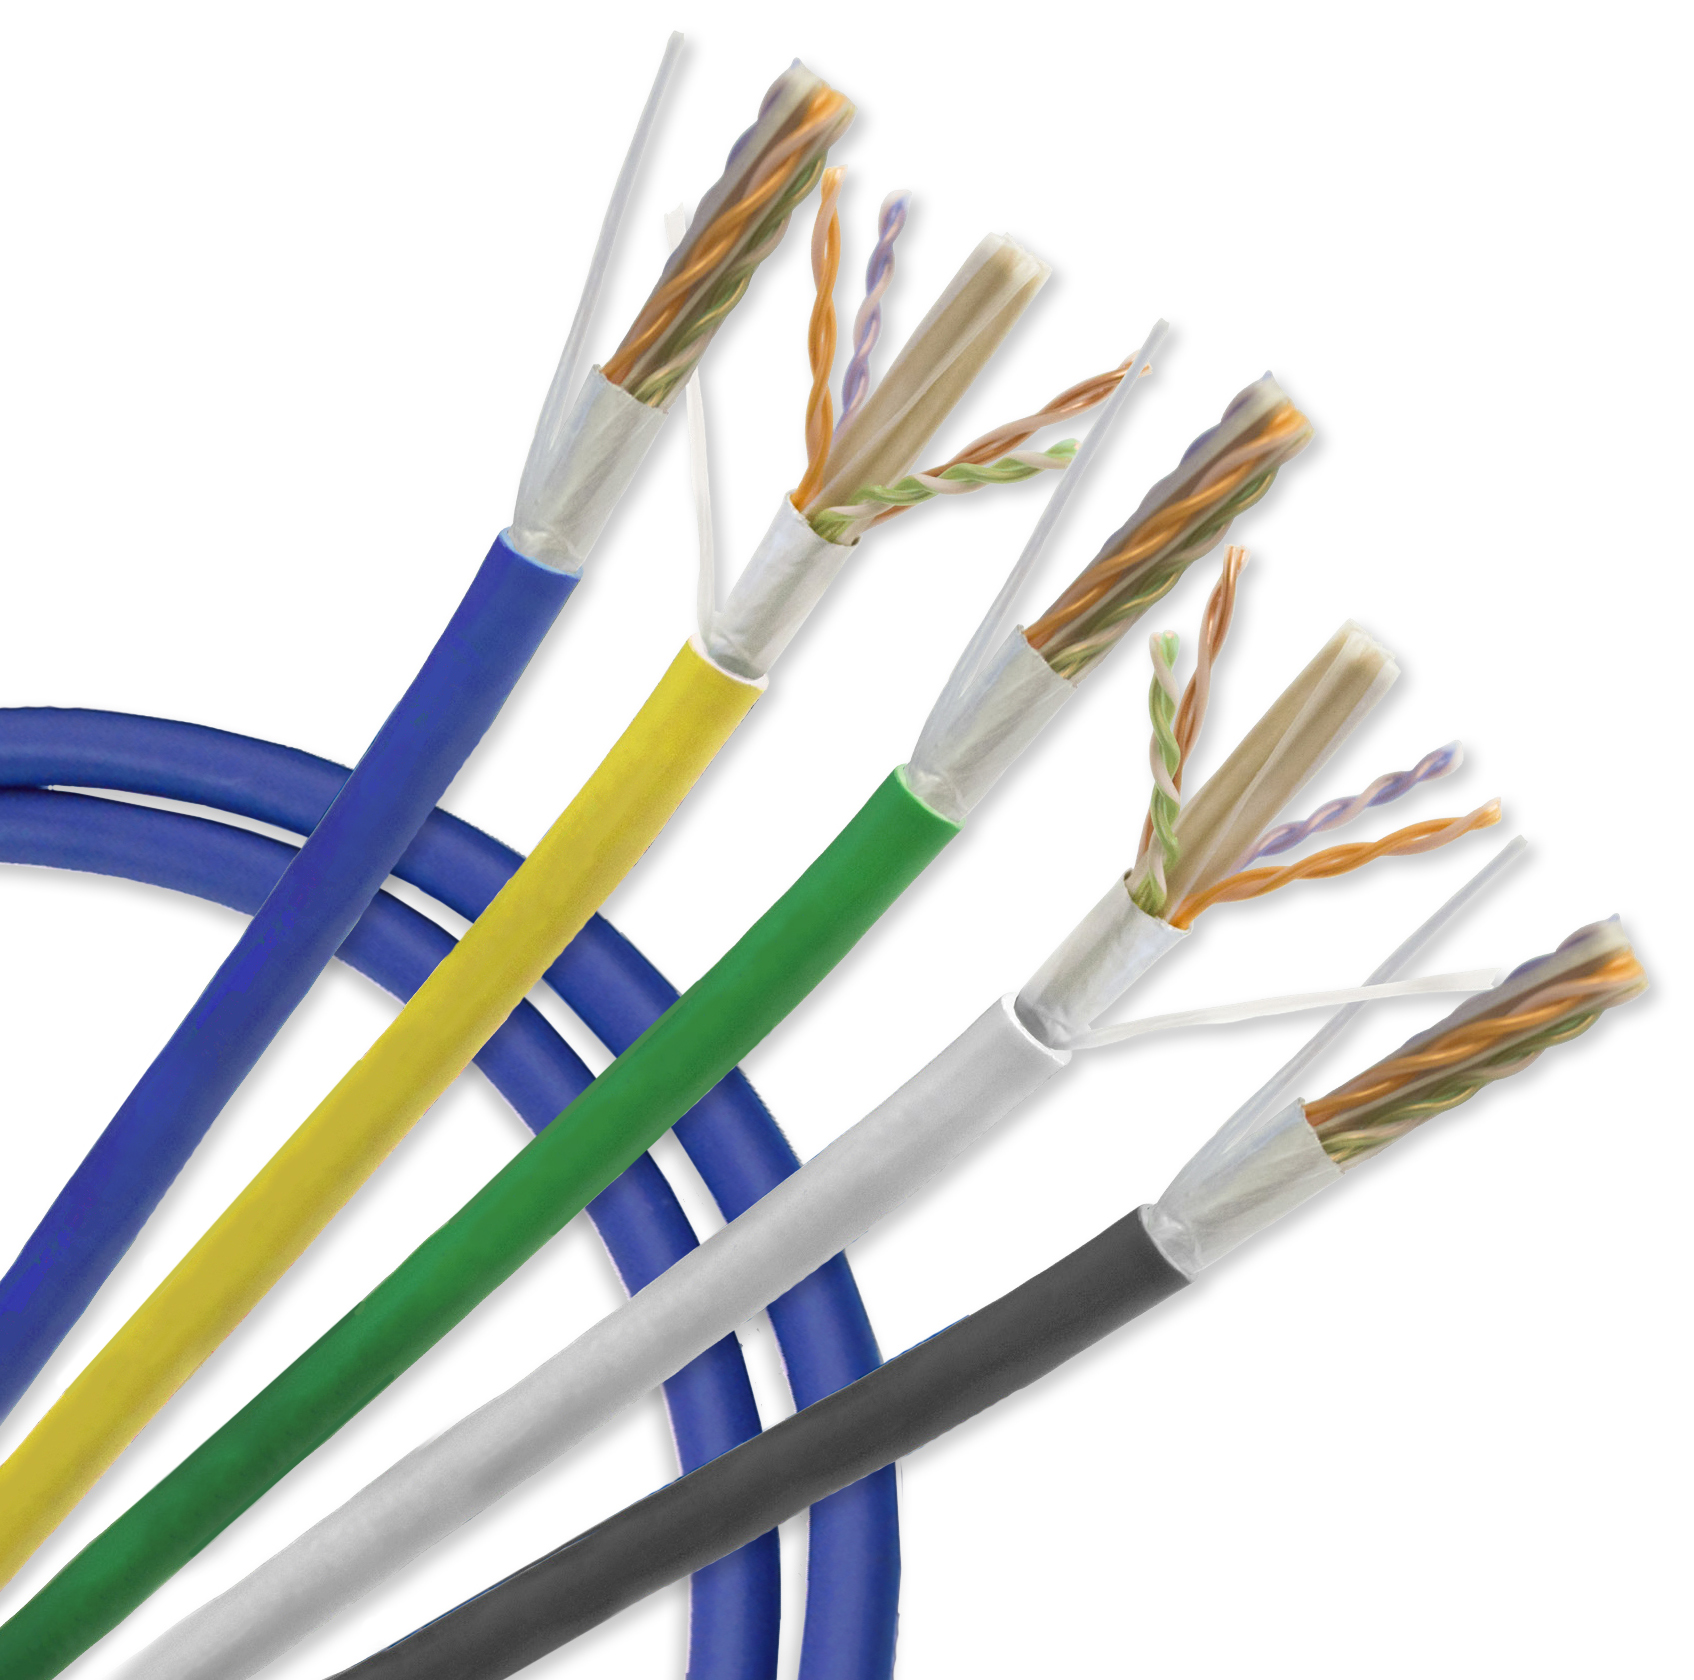 Cable Types Explained - Crossroad Energy Solutions Inc.